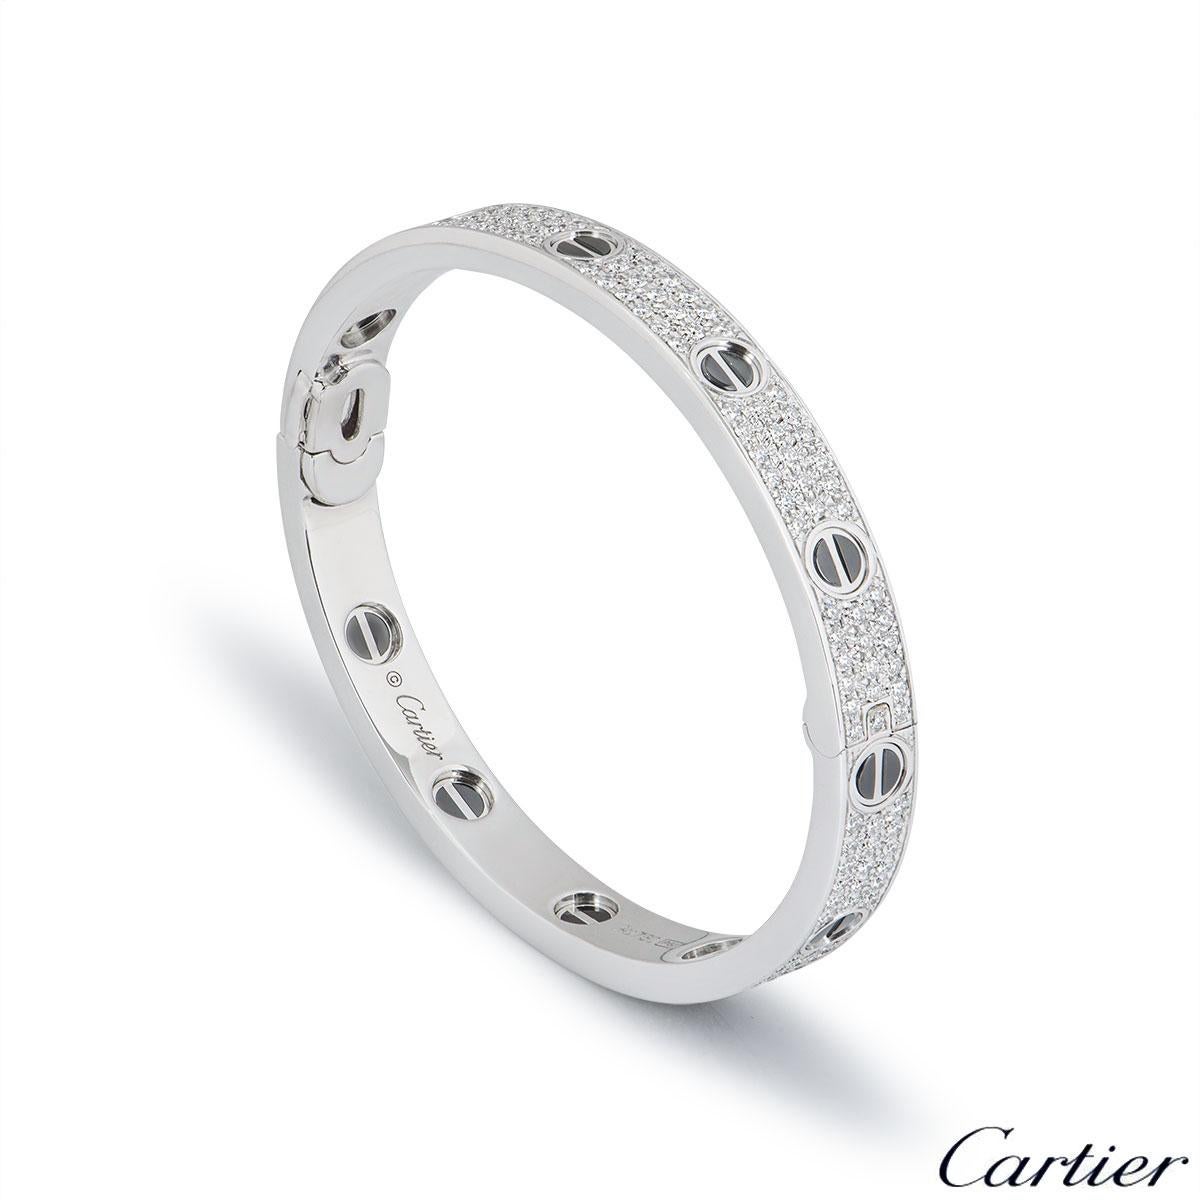 An 18k white gold diamond and ceramic bracelet by Cartier from the Love collection. The bracelet has black ceramic set to the iconic screw motifs around the outer edge with 204 round brilliant cut diamonds pave set between the screws. The total